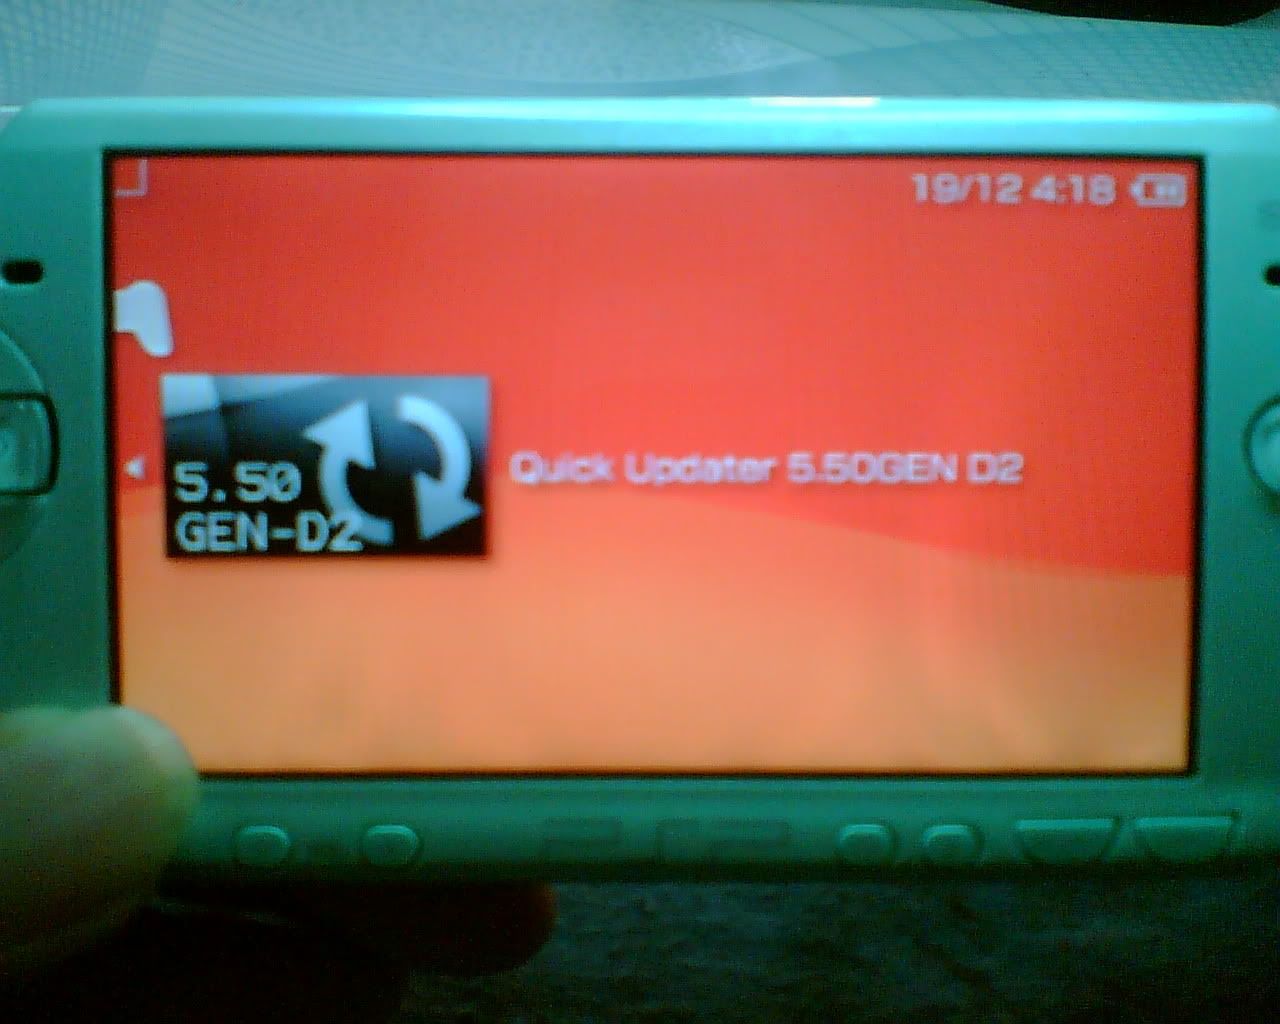 Thumbs up Procedure On how to Update your Hackable PSP[Slim/Fhat] to 5.50 GEN D-2 w/out pandora Image017-1